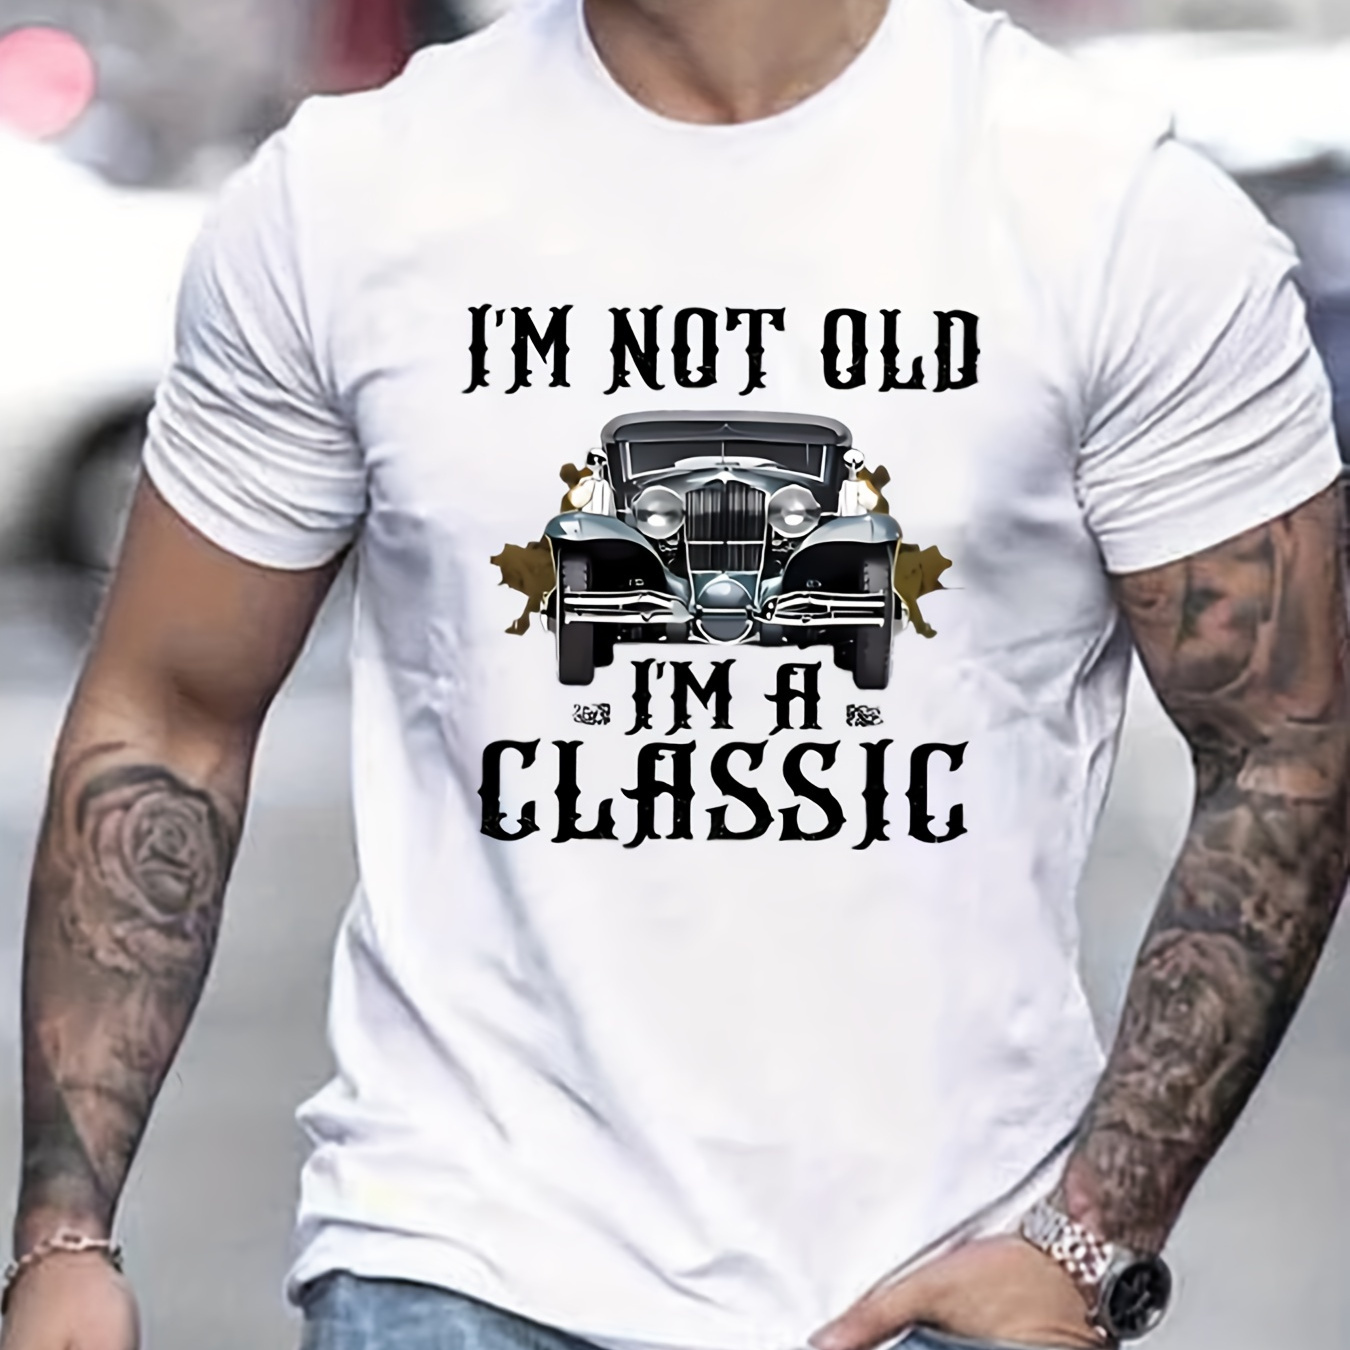 

Car & Funny Not Old Slogan Pattern Print Men's T-shirt, Graphic Tee Men's Summer Clothes, Men's Outfits